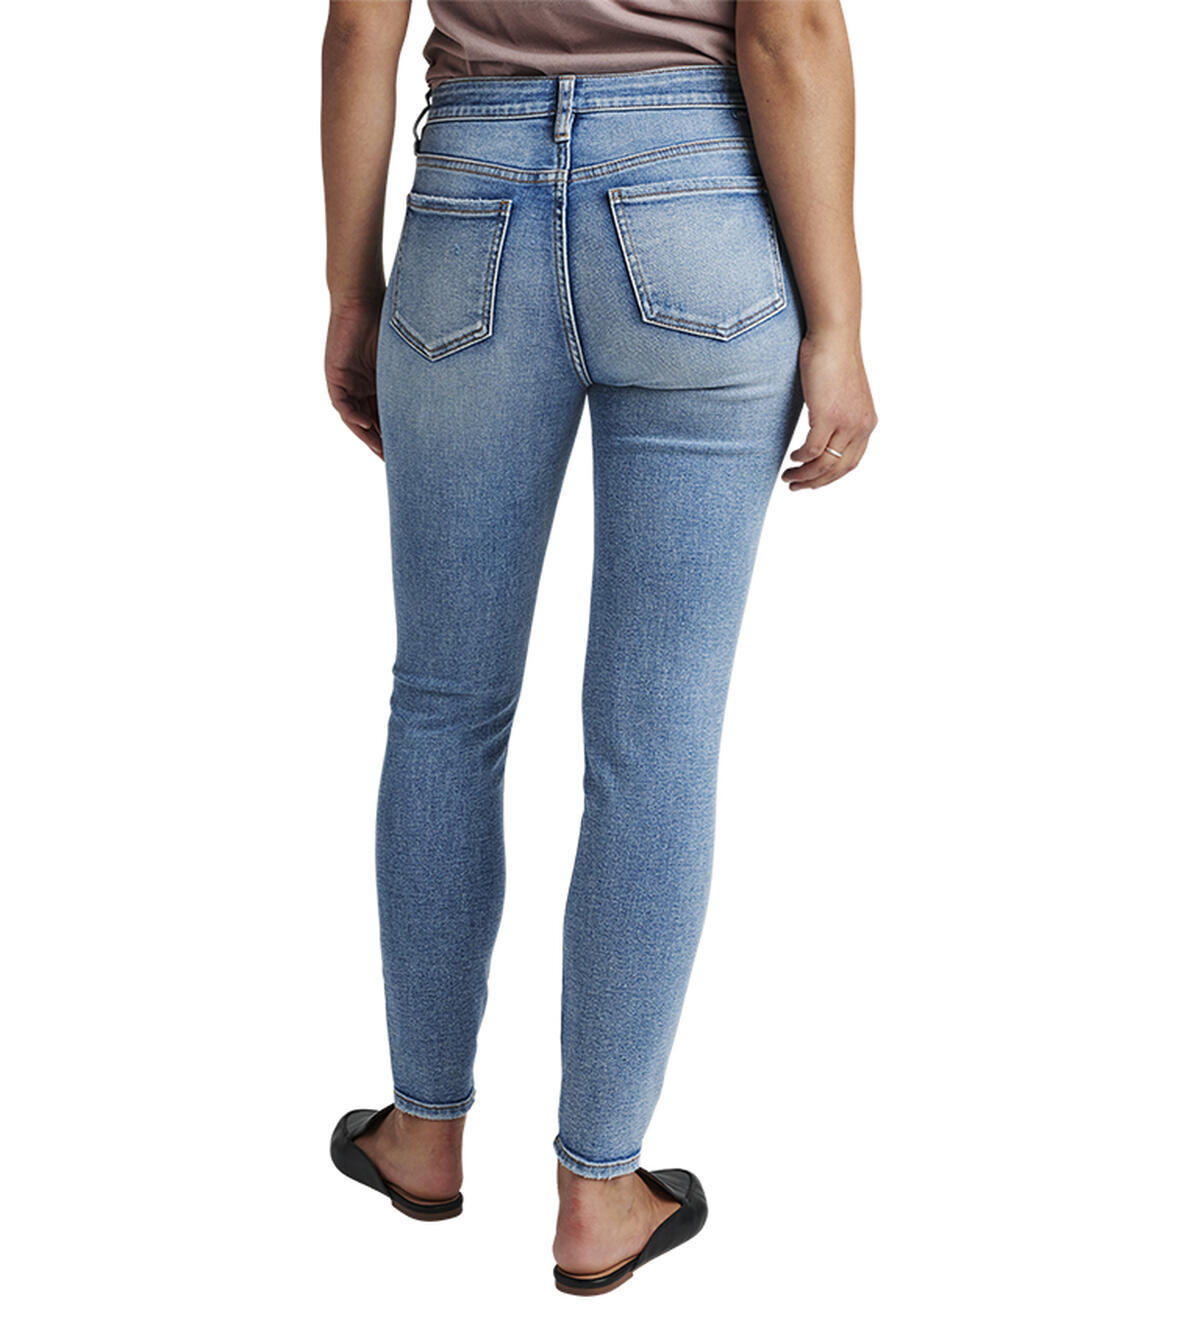 Cecilia Mid Rise Skinny Jeans, , hi-res image number 1